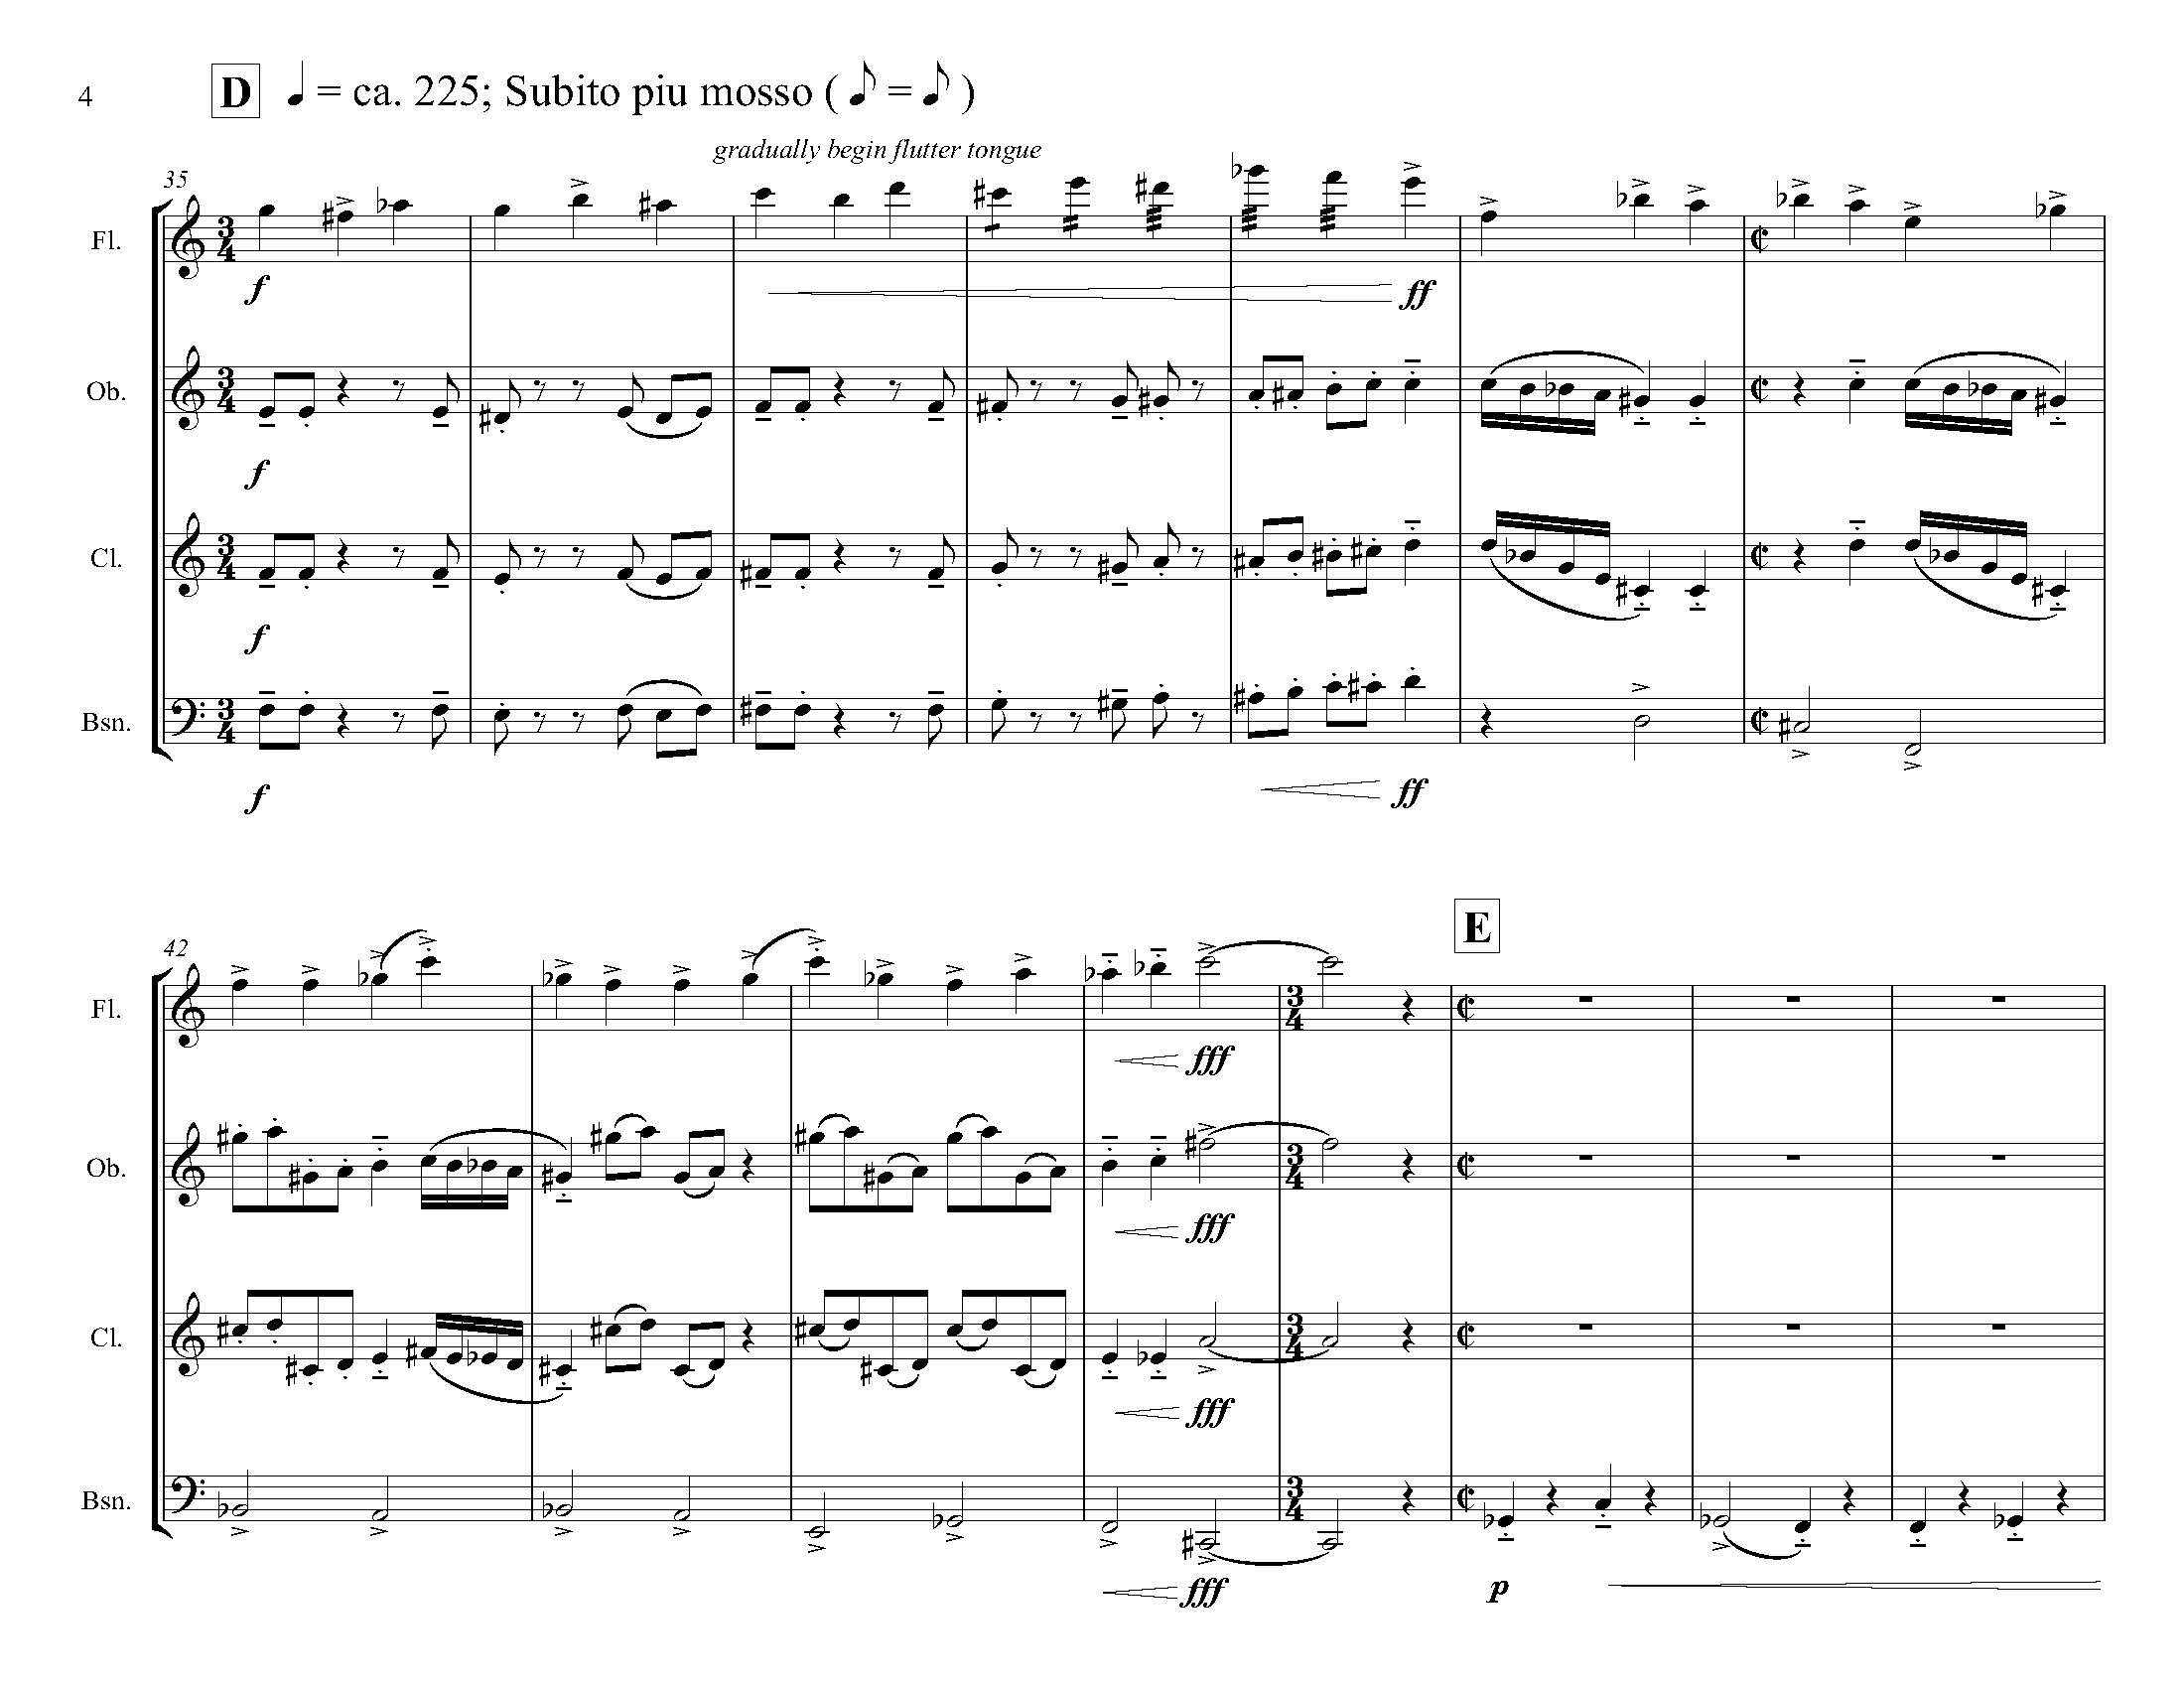 March the Twenty-Fifth - Complete Score_Page_10.jpg